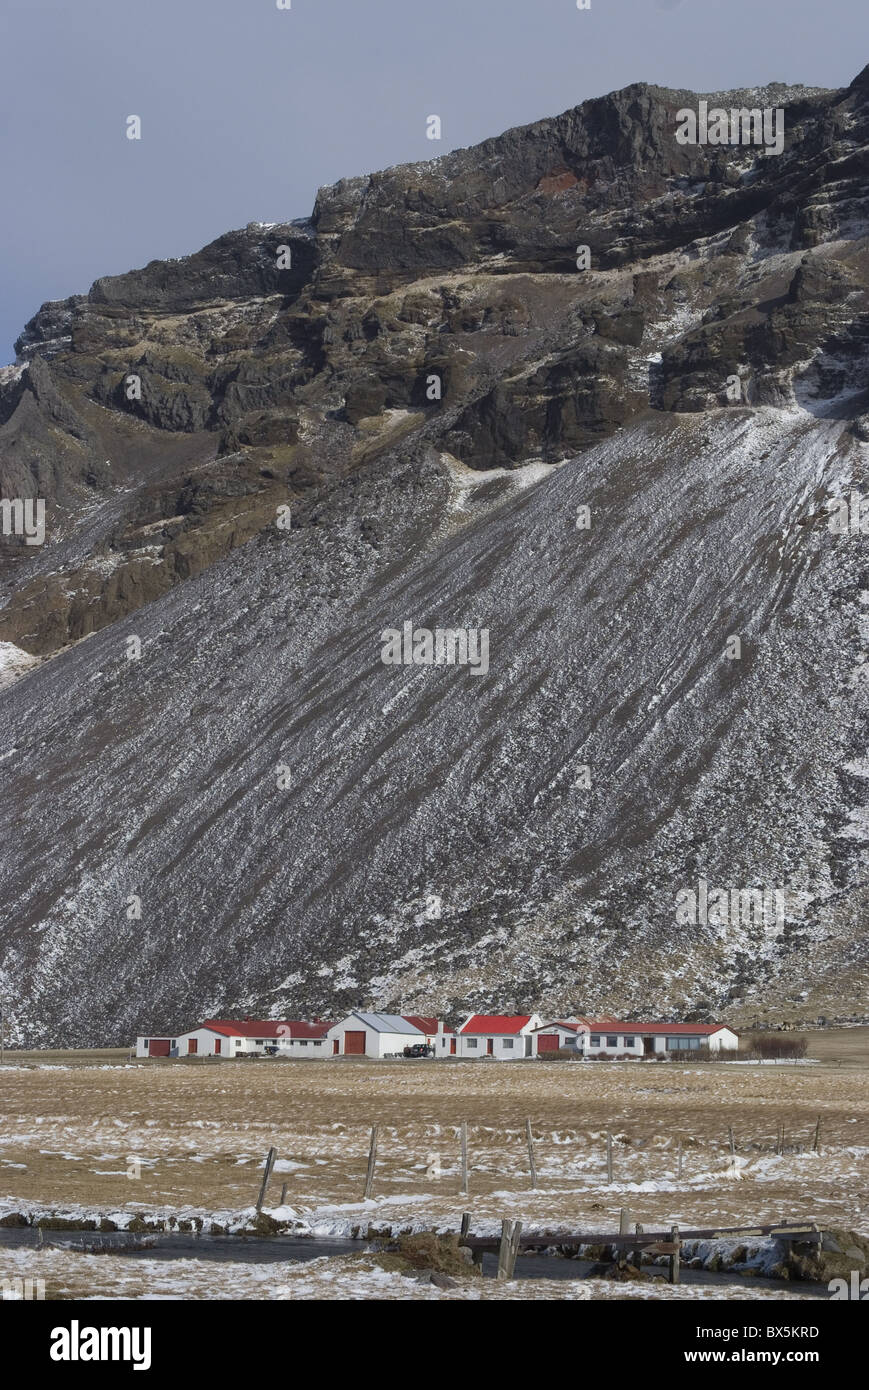 Typical farm in a location likely to be evacuated during volcanic eruptions, near Skogafoss, South Iceland, Iceland Stock Photo